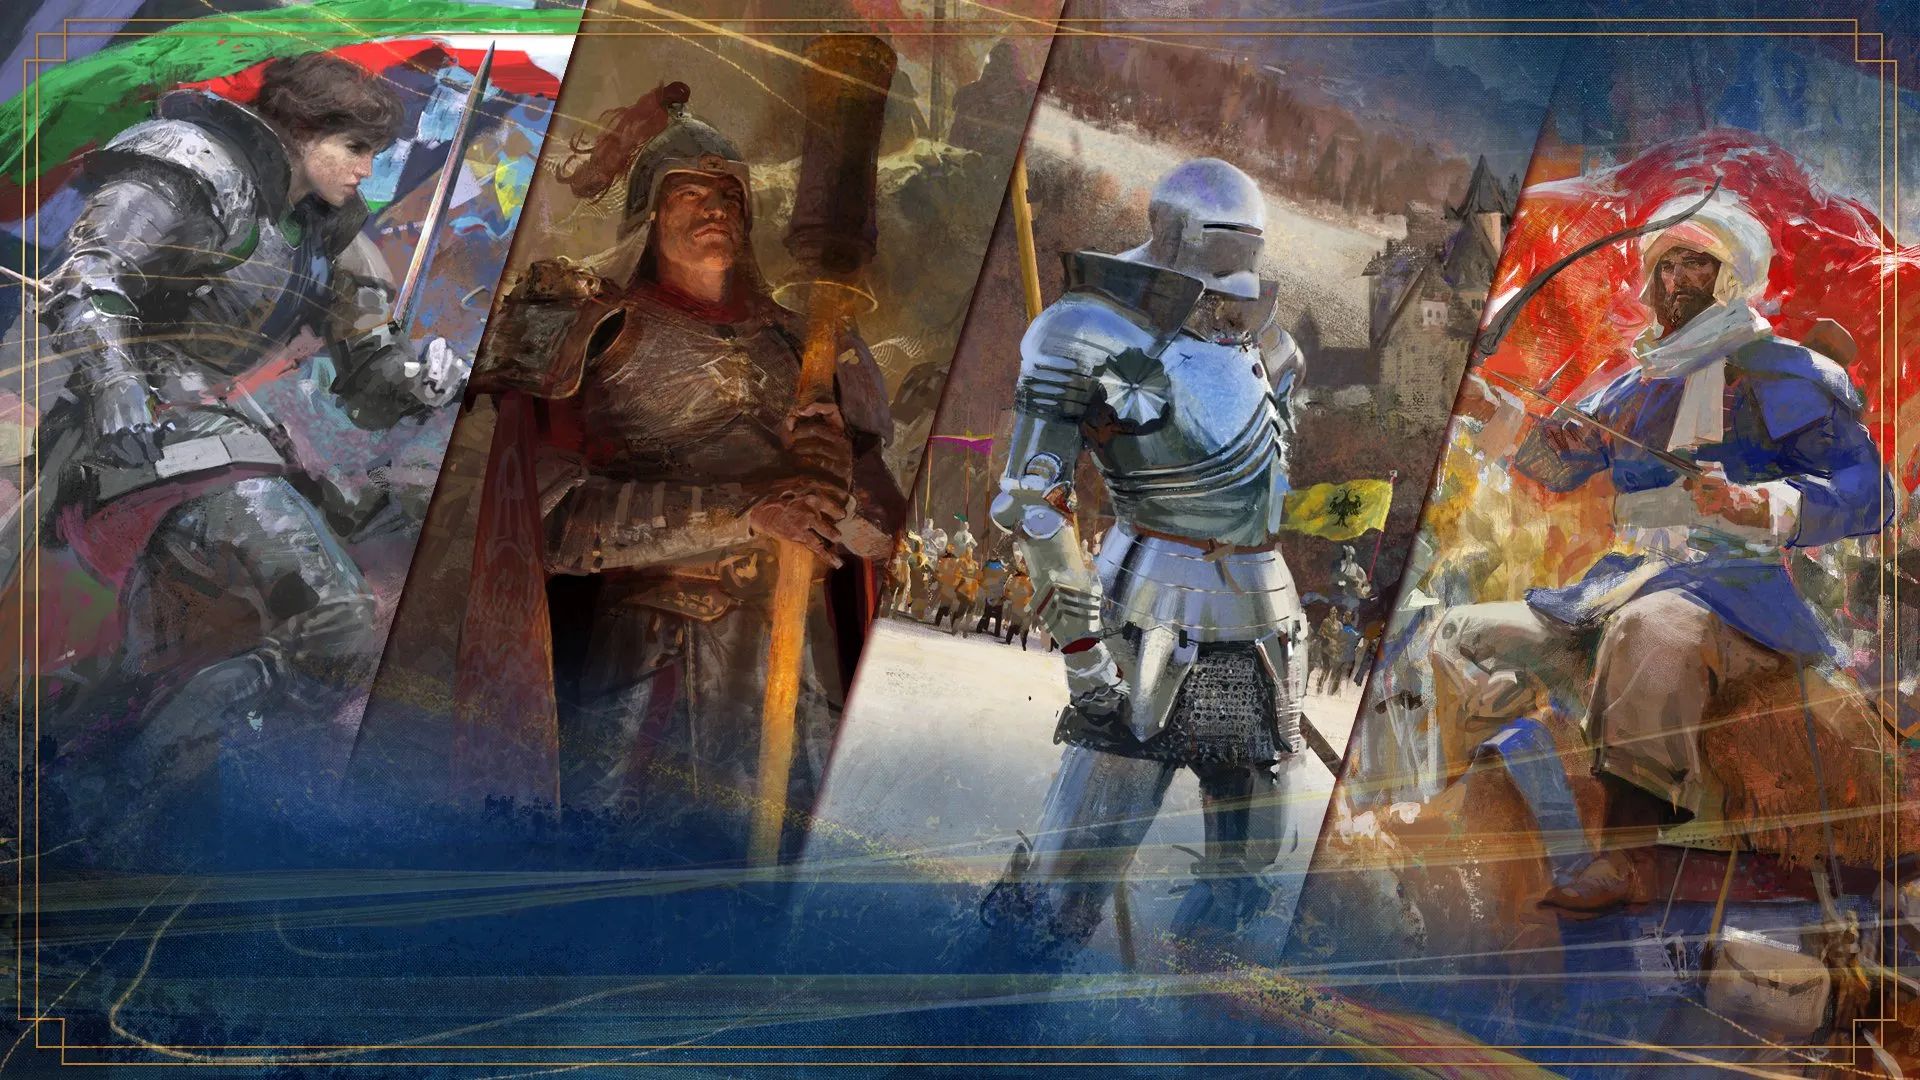 Image for Age of Empires 4 players are getting Ranked Play, a Content Editor, Seasonal Events and more